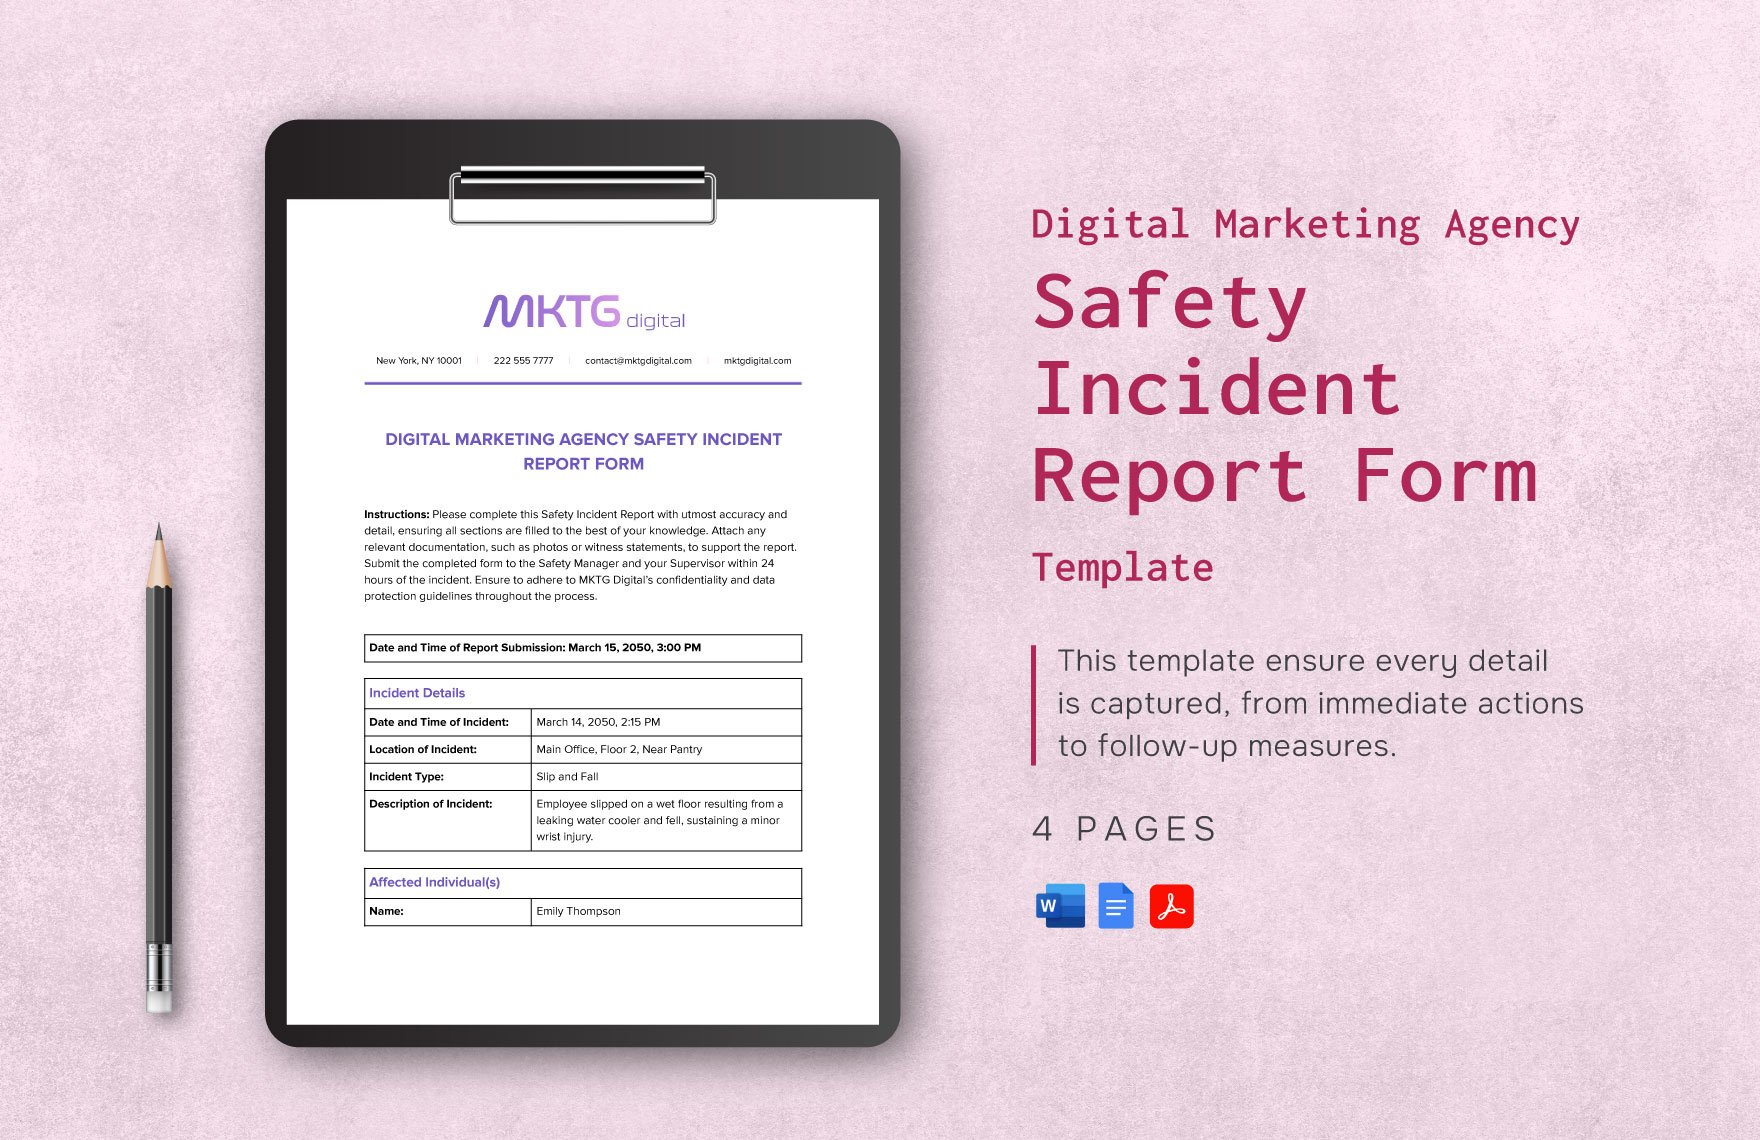 Digital Marketing Agency Safety Incident Report Form Template